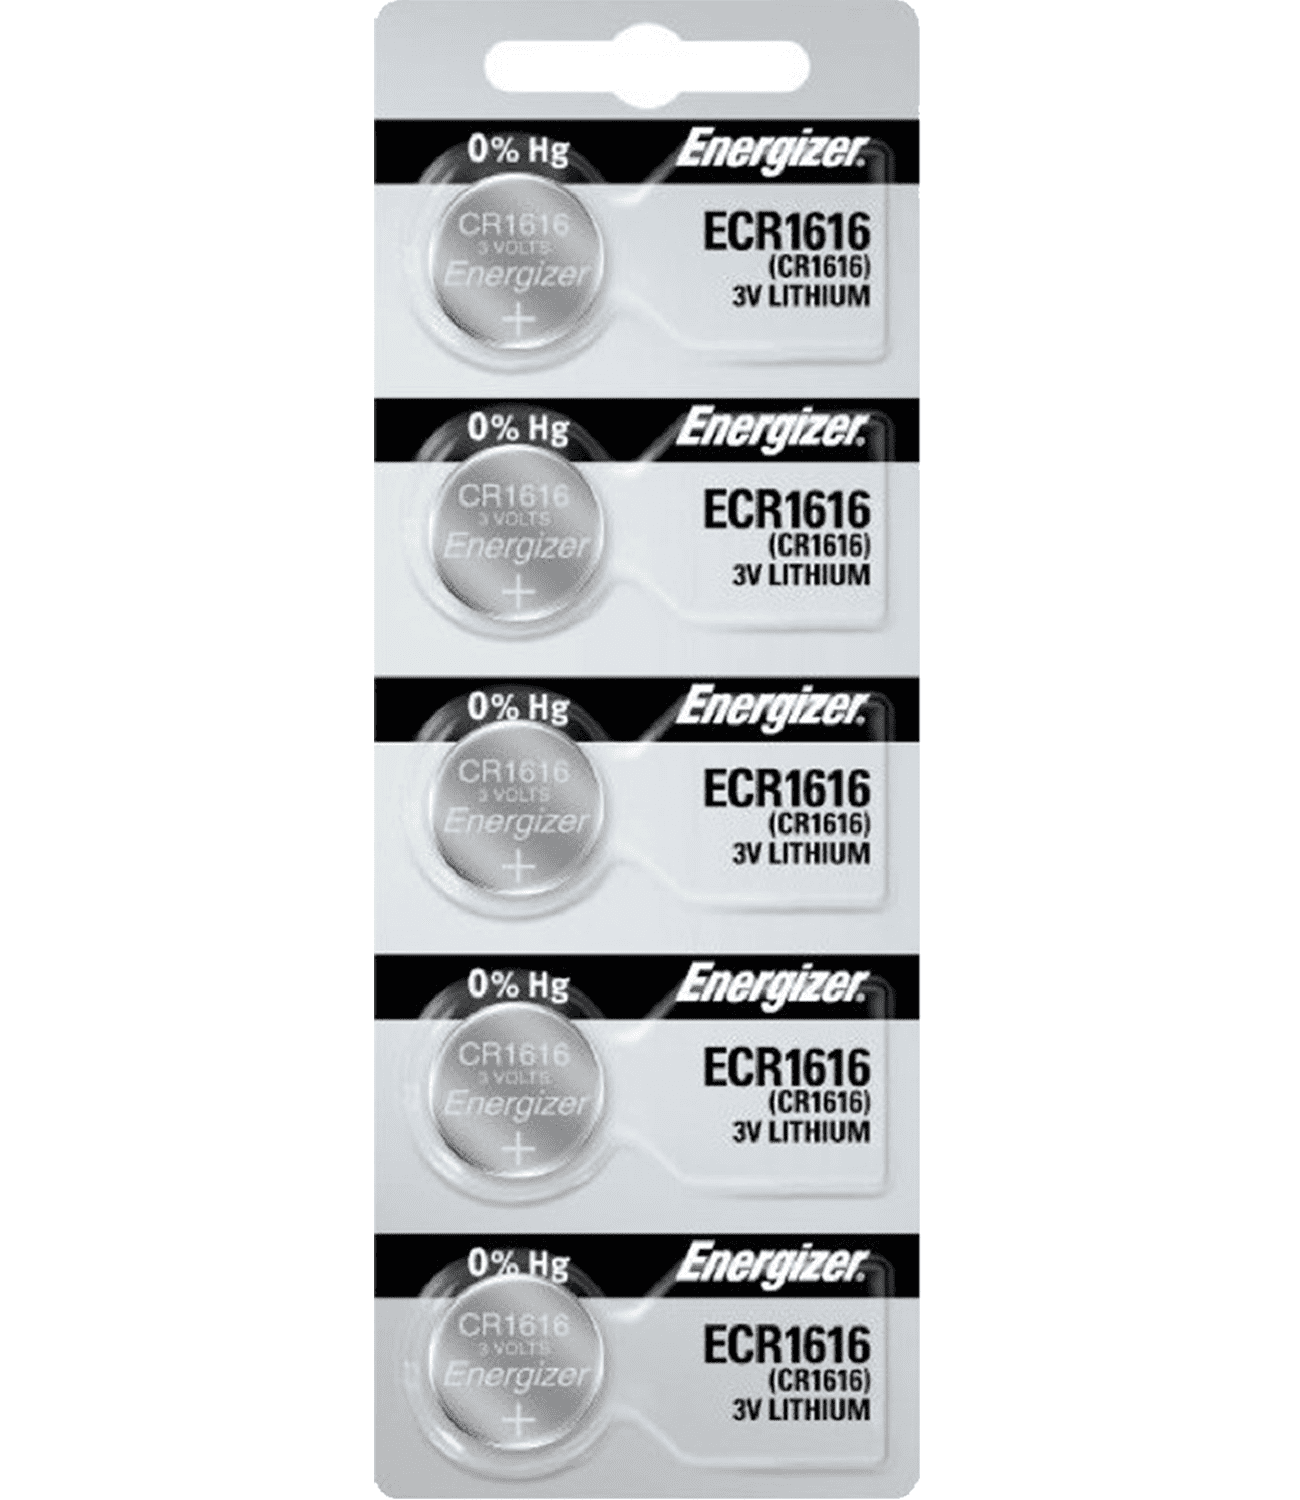 Energizer CR1616 3V Lithium Coin Cell Battery (10 Count)